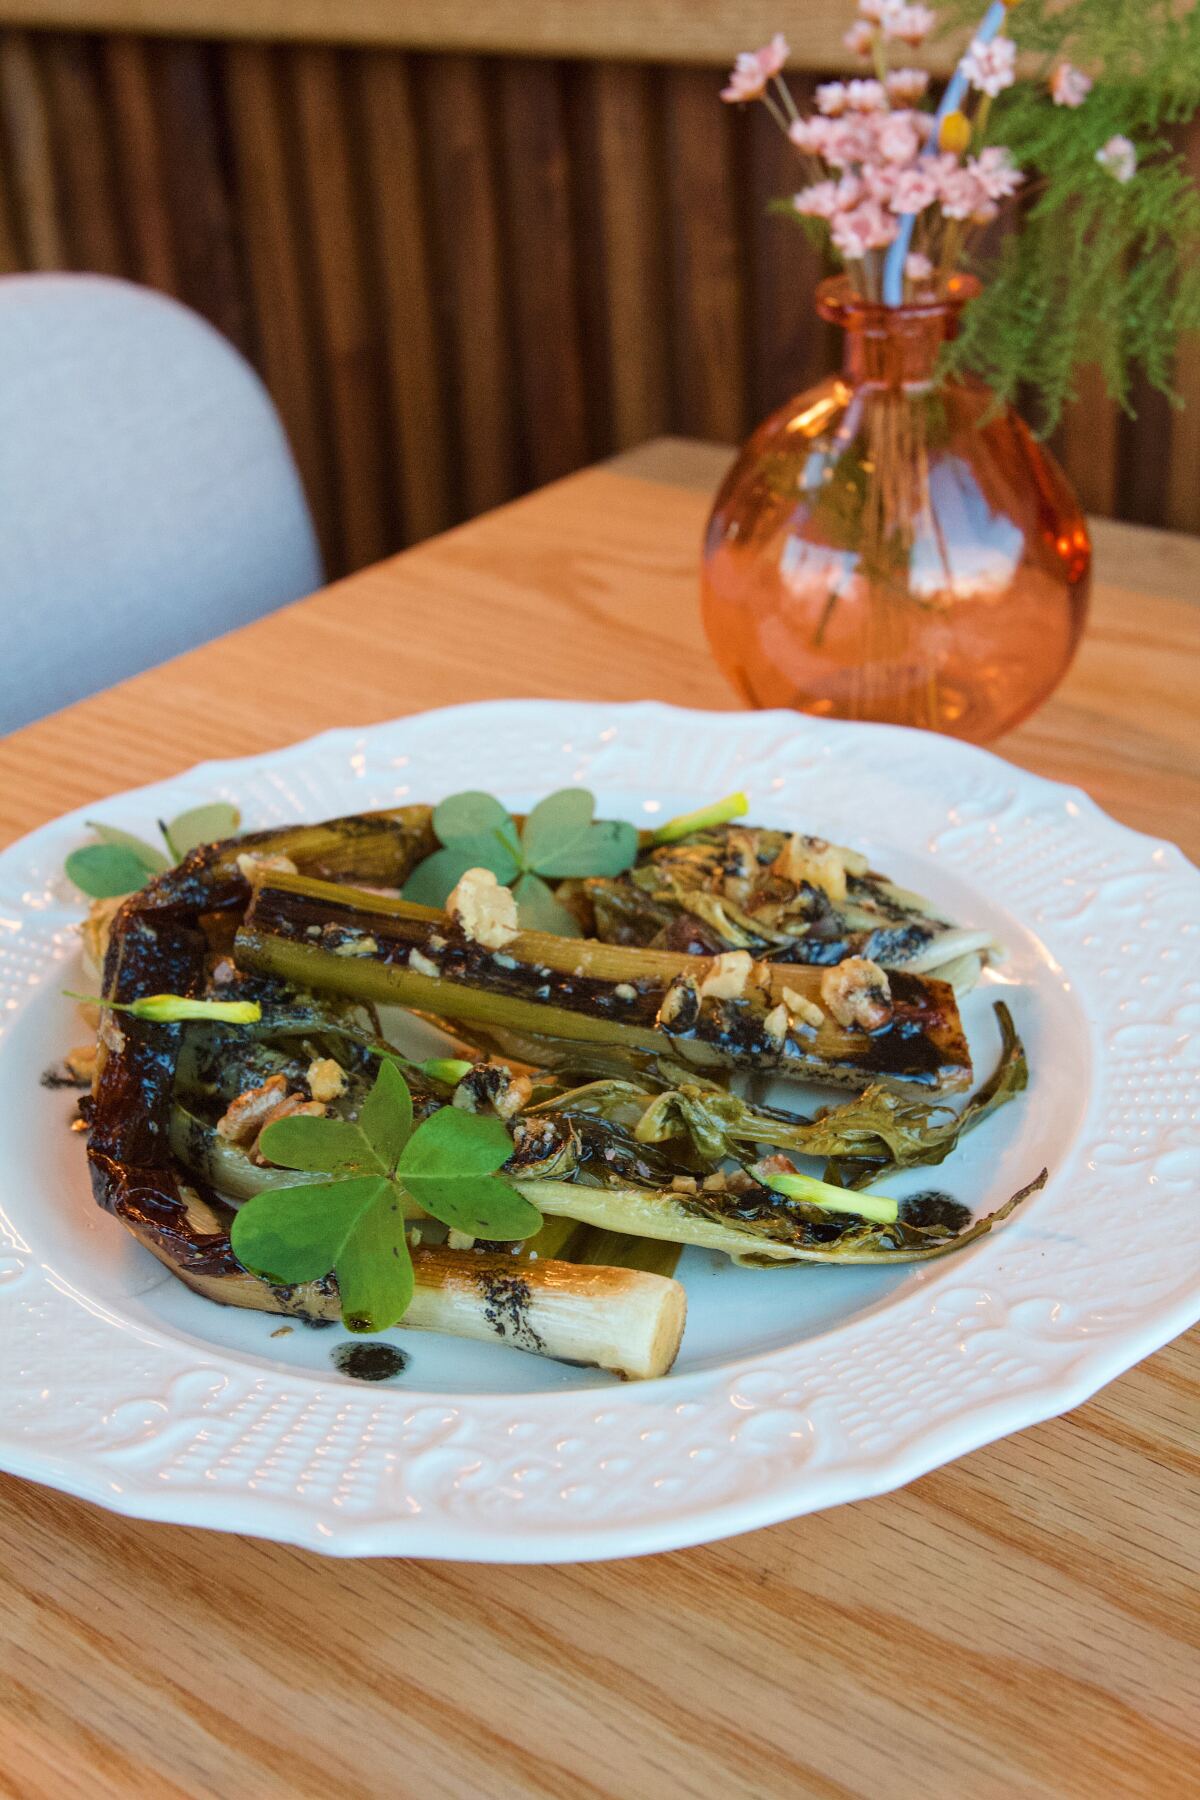 Braised leeks and endives with walnuts in vinaigrette on a white plate